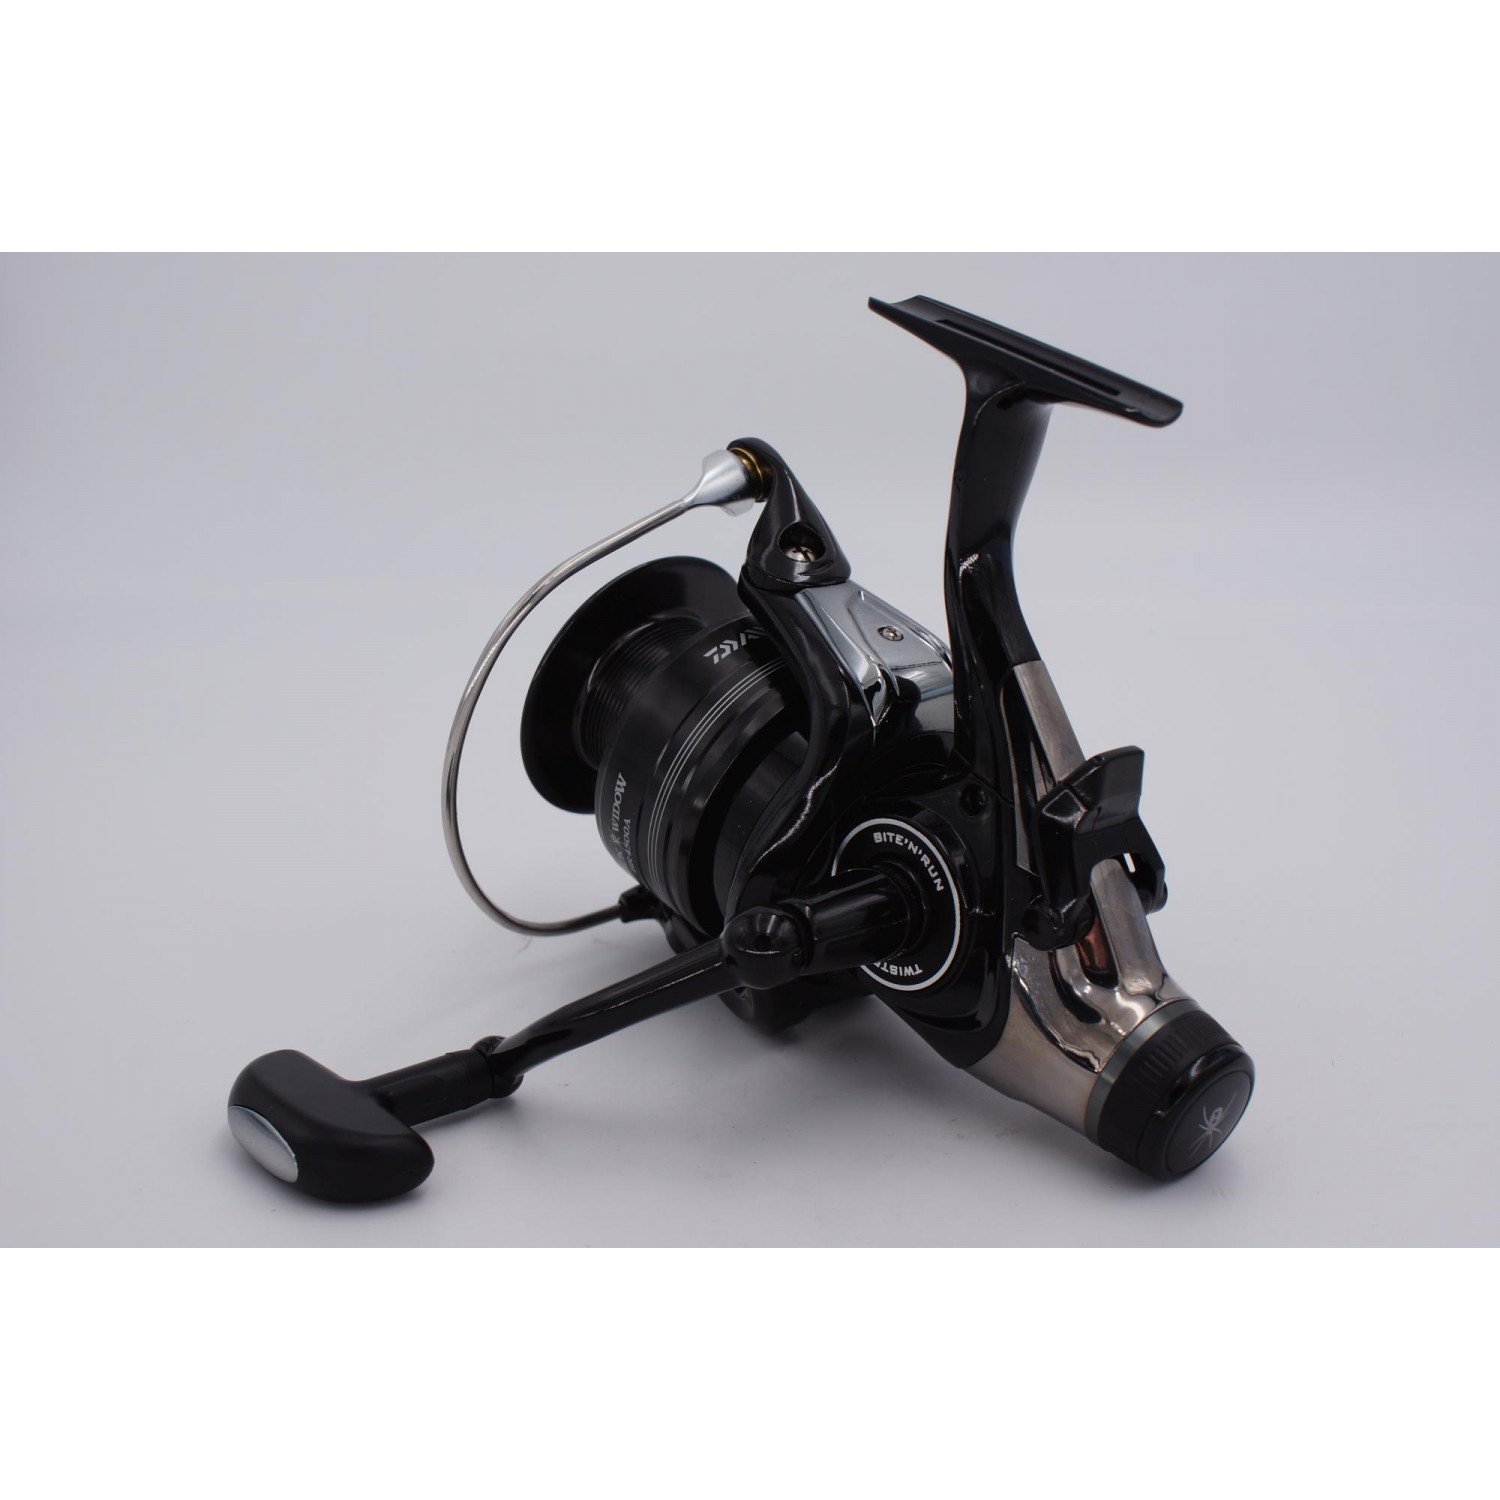 DAIWA Black Widow BR A, 4500, left and right hand, Free spool